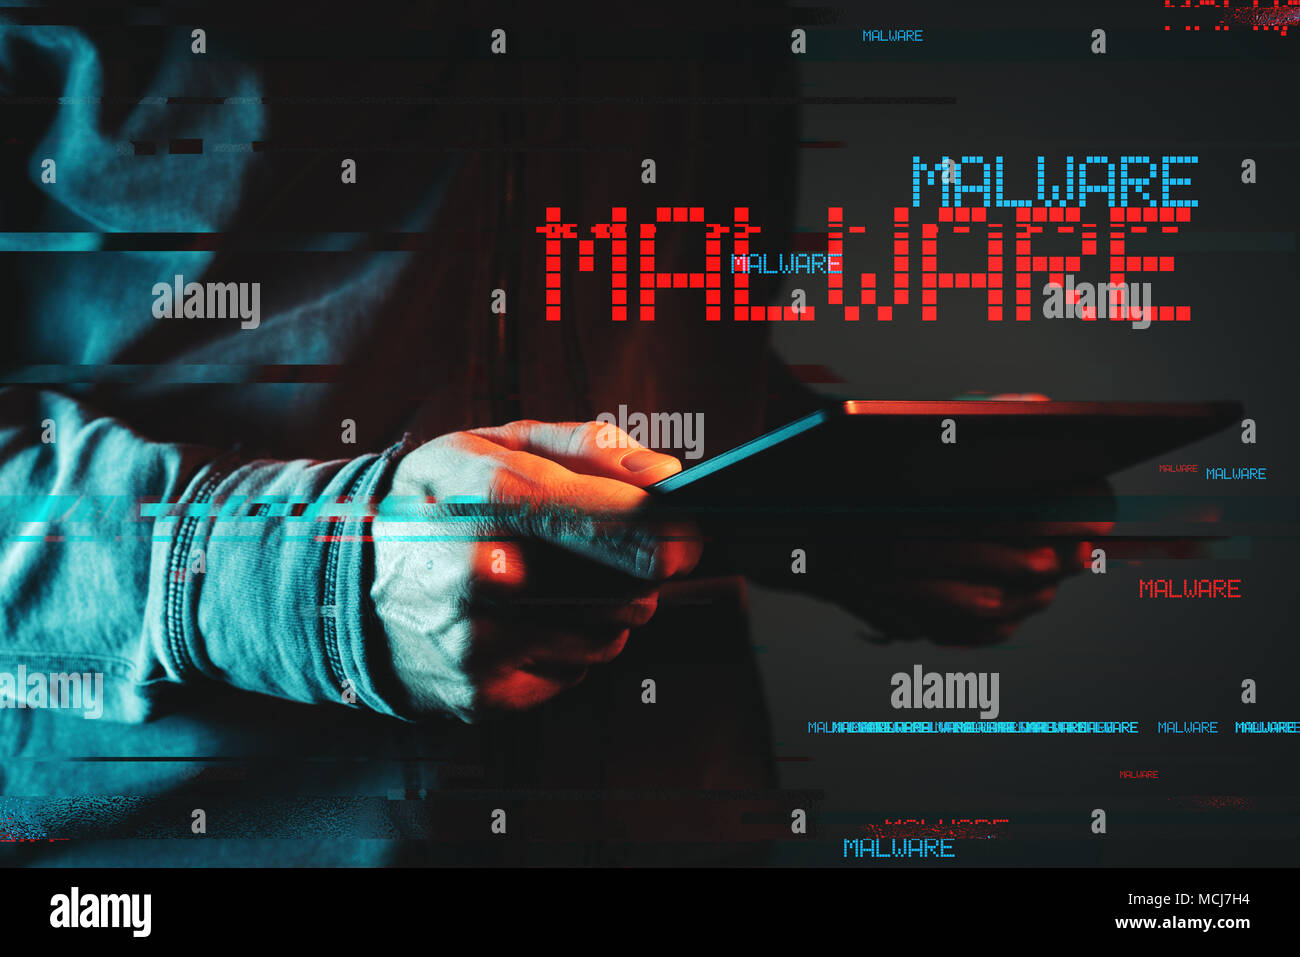 Malware concept with person using tablet computer, low key red and blue lit image and digital glitch effect Stock Photo